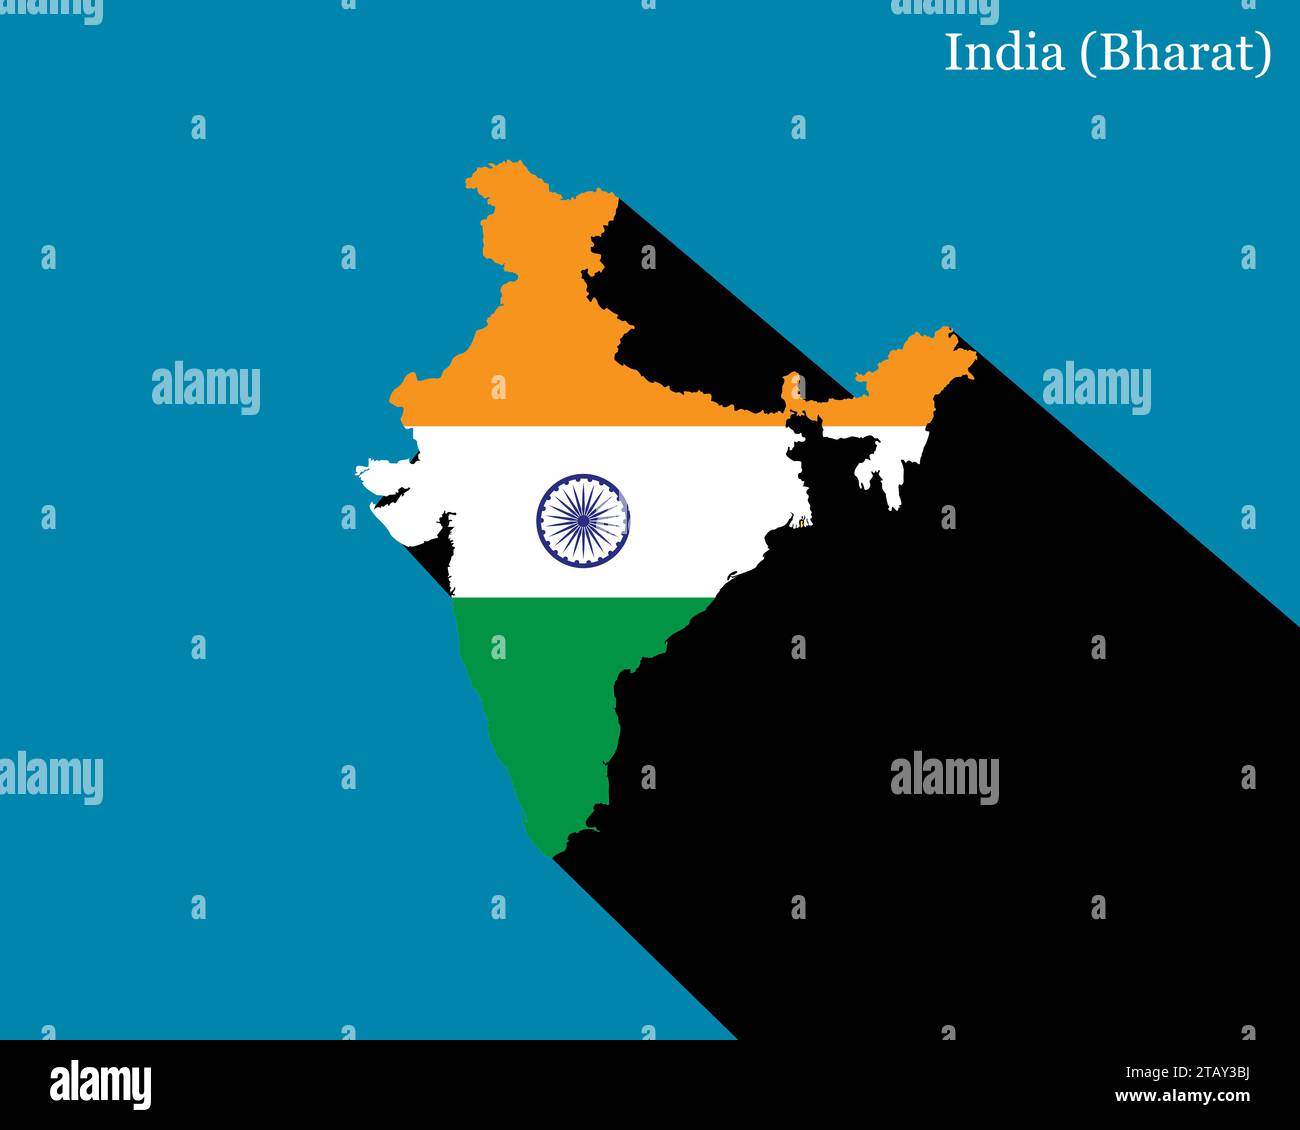 India Bharat map overlapped with Indian flag with shadow vector illustration Stock Vector